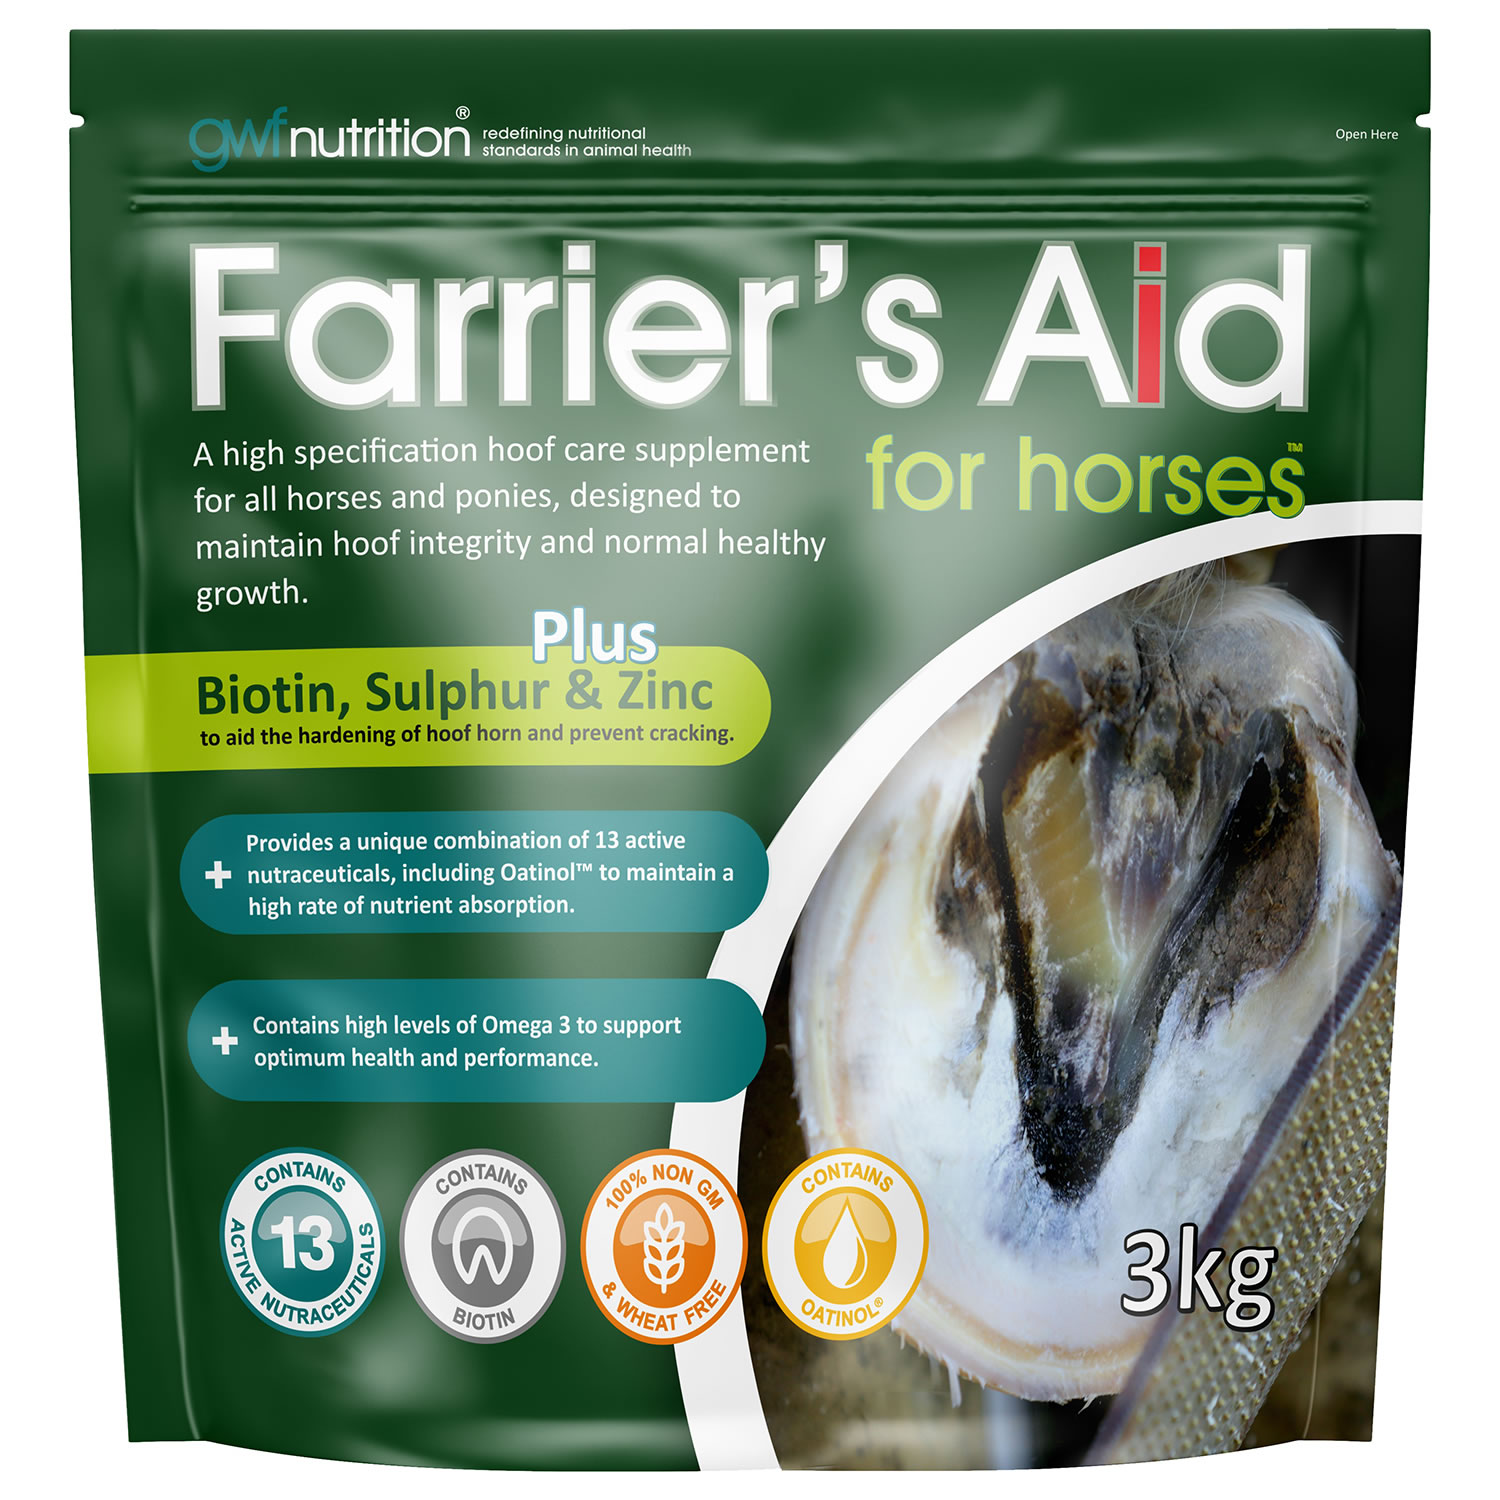 GWF FARRIERS AID FOR HORSES 3 KG 3 KG